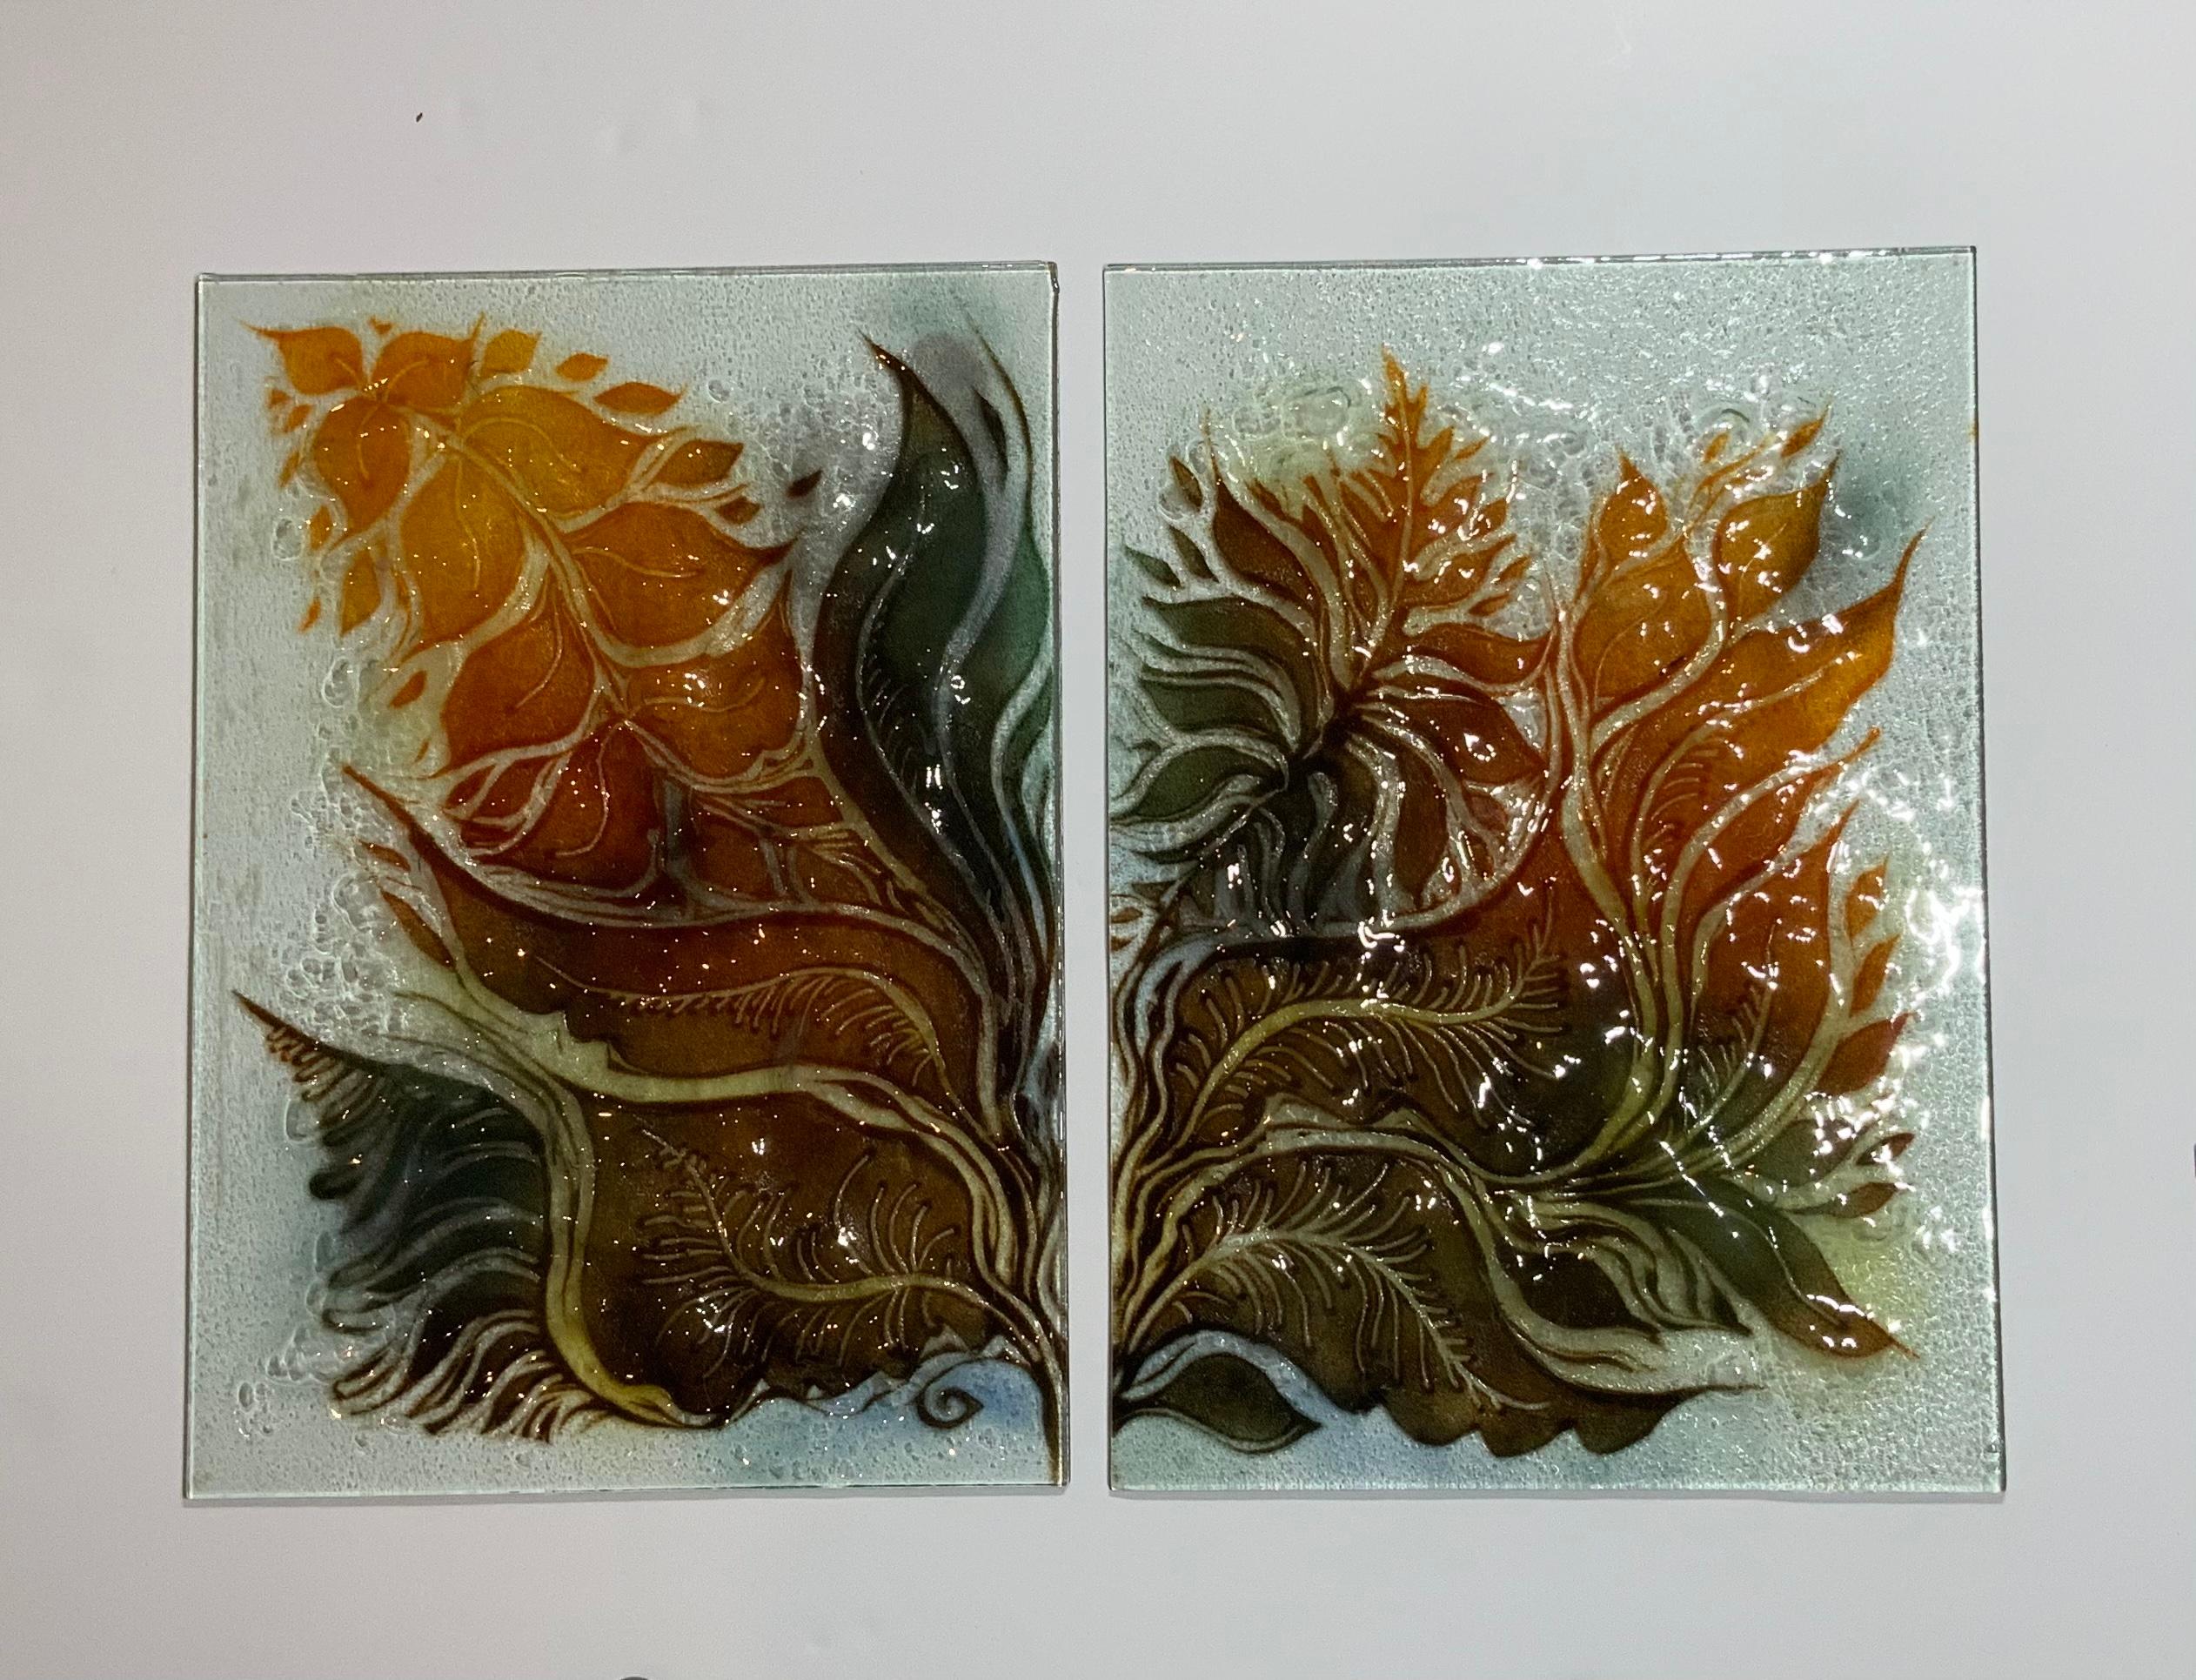 Beautiful pair of Israeli art glass plates made of two hand painted sheet of glass put together and bake in the kiln in high temperature , bond together with dents and texture, to achieve exceptional mix of color variation of vines and floral motifs